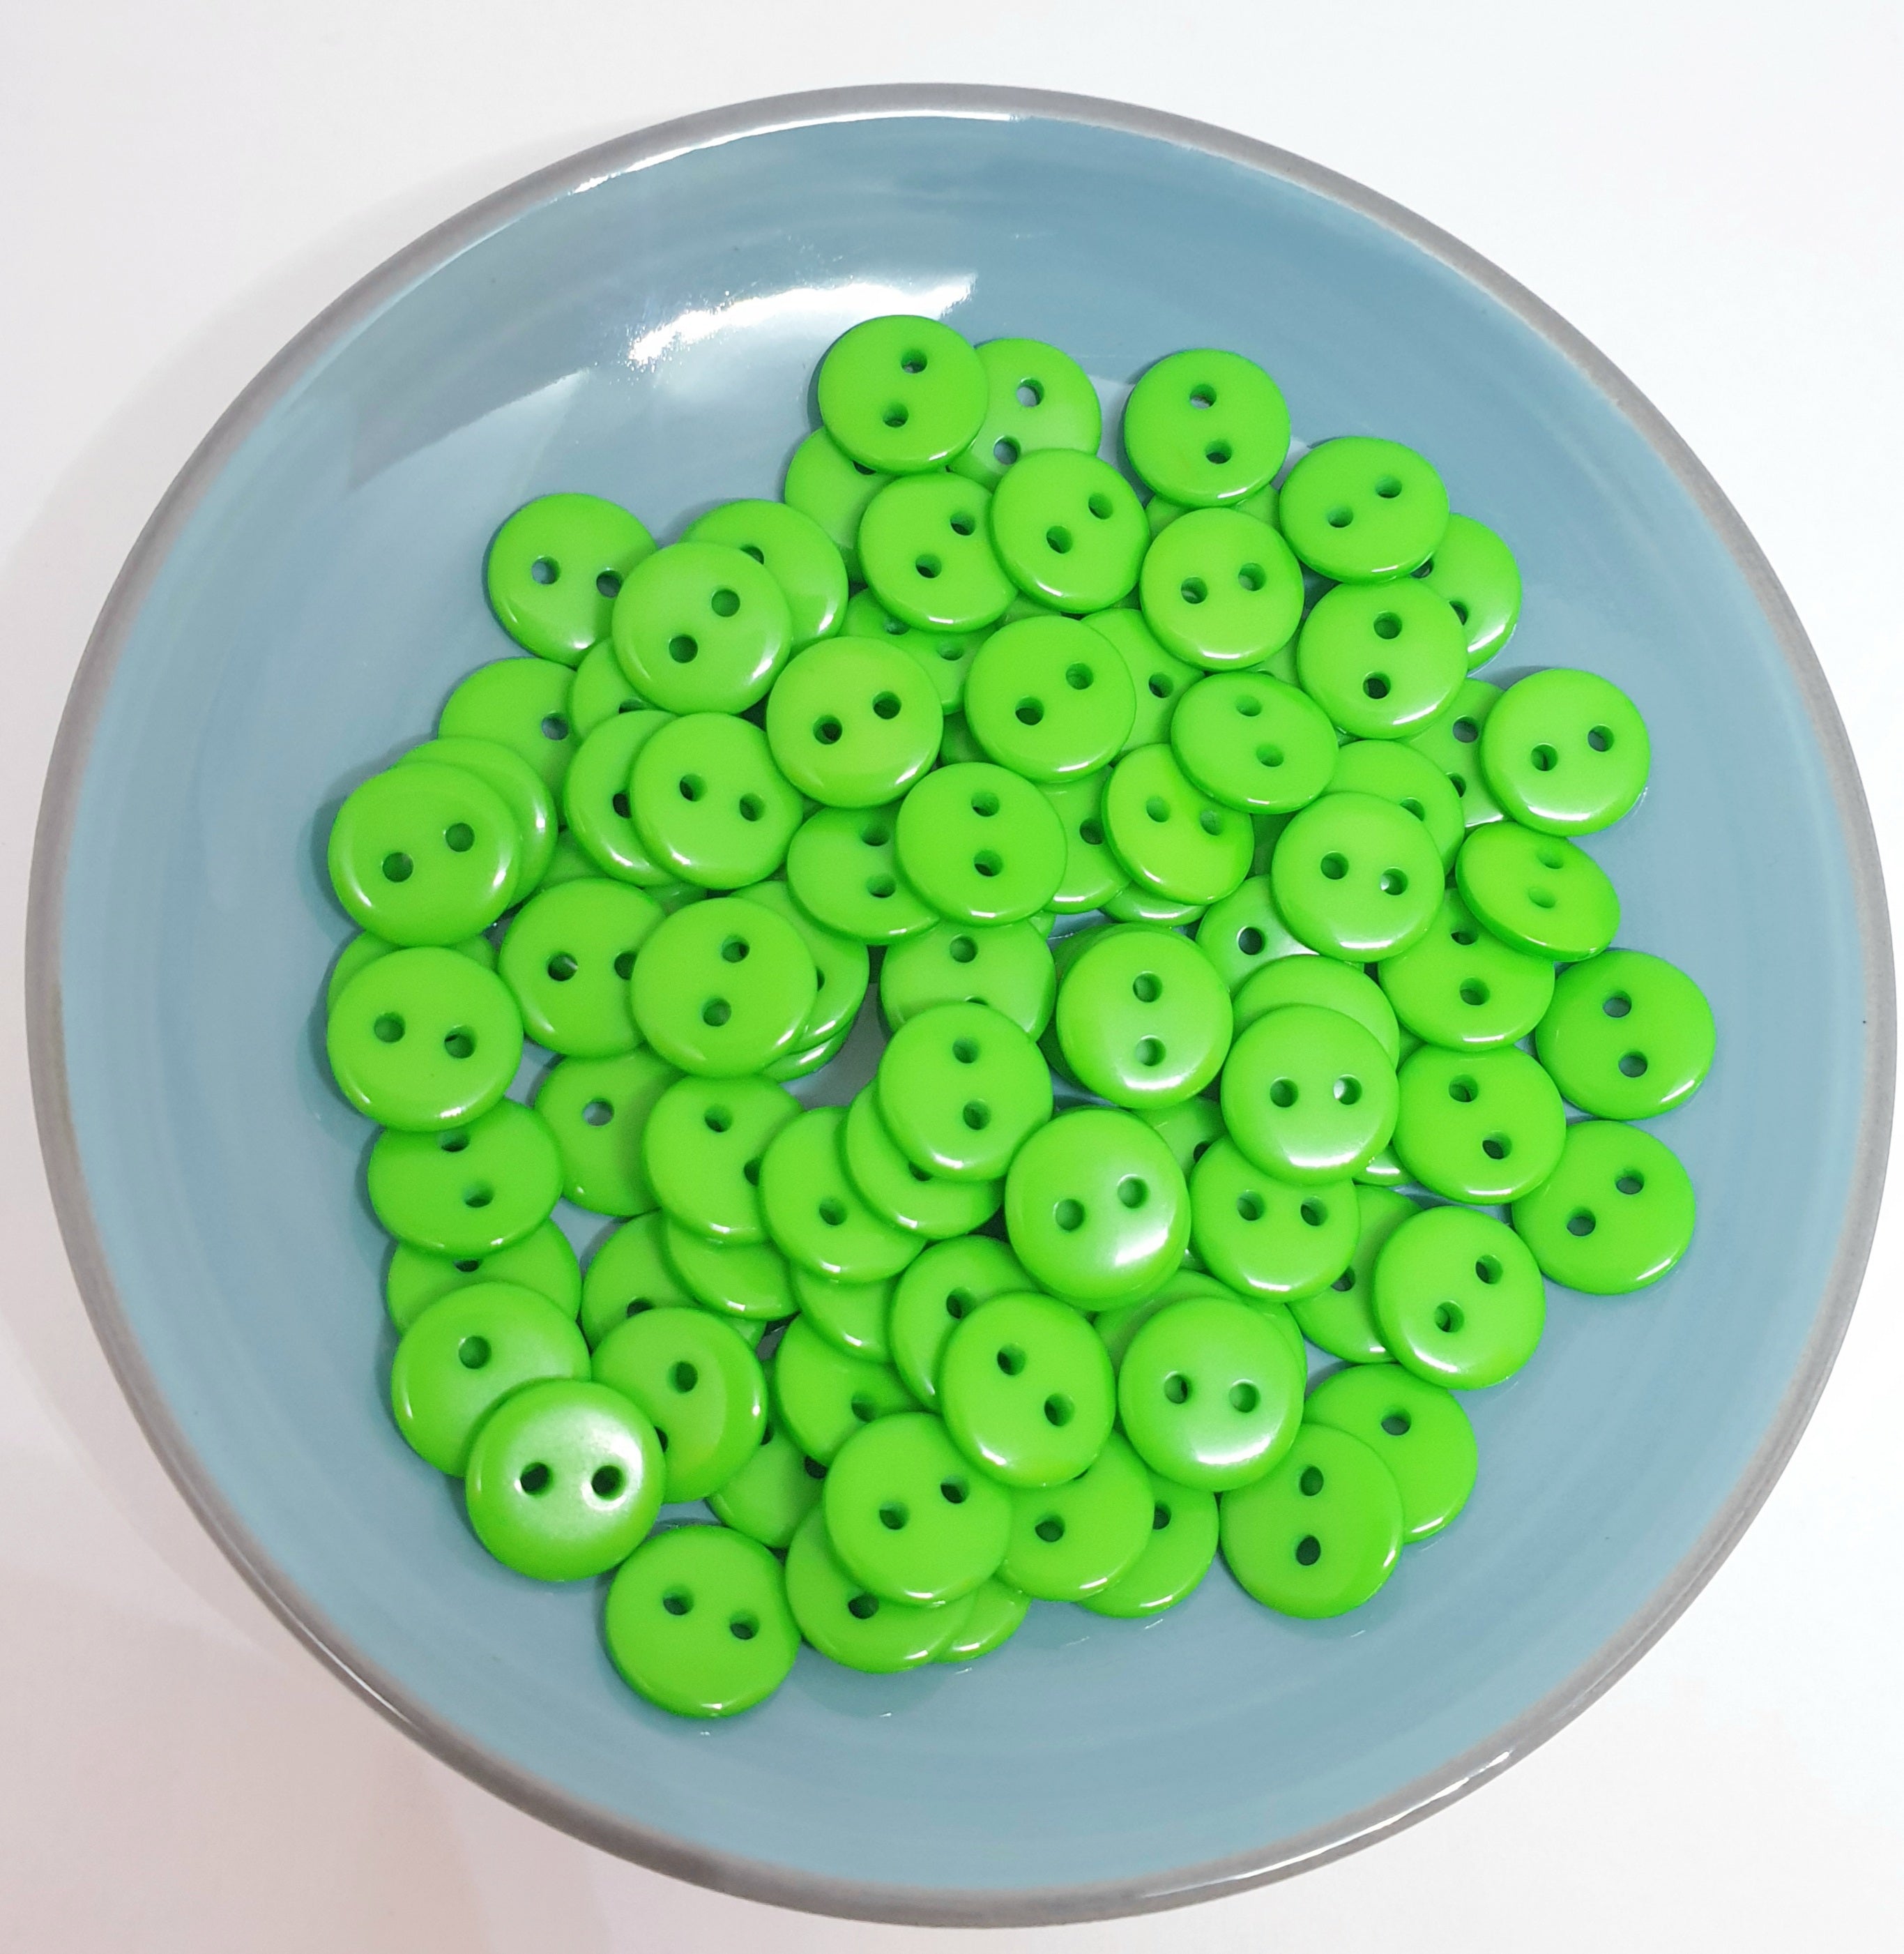 MajorCrafts 120pcs 10mm Bright Green 2 Holes Small Round Resin Sewing Buttons B16